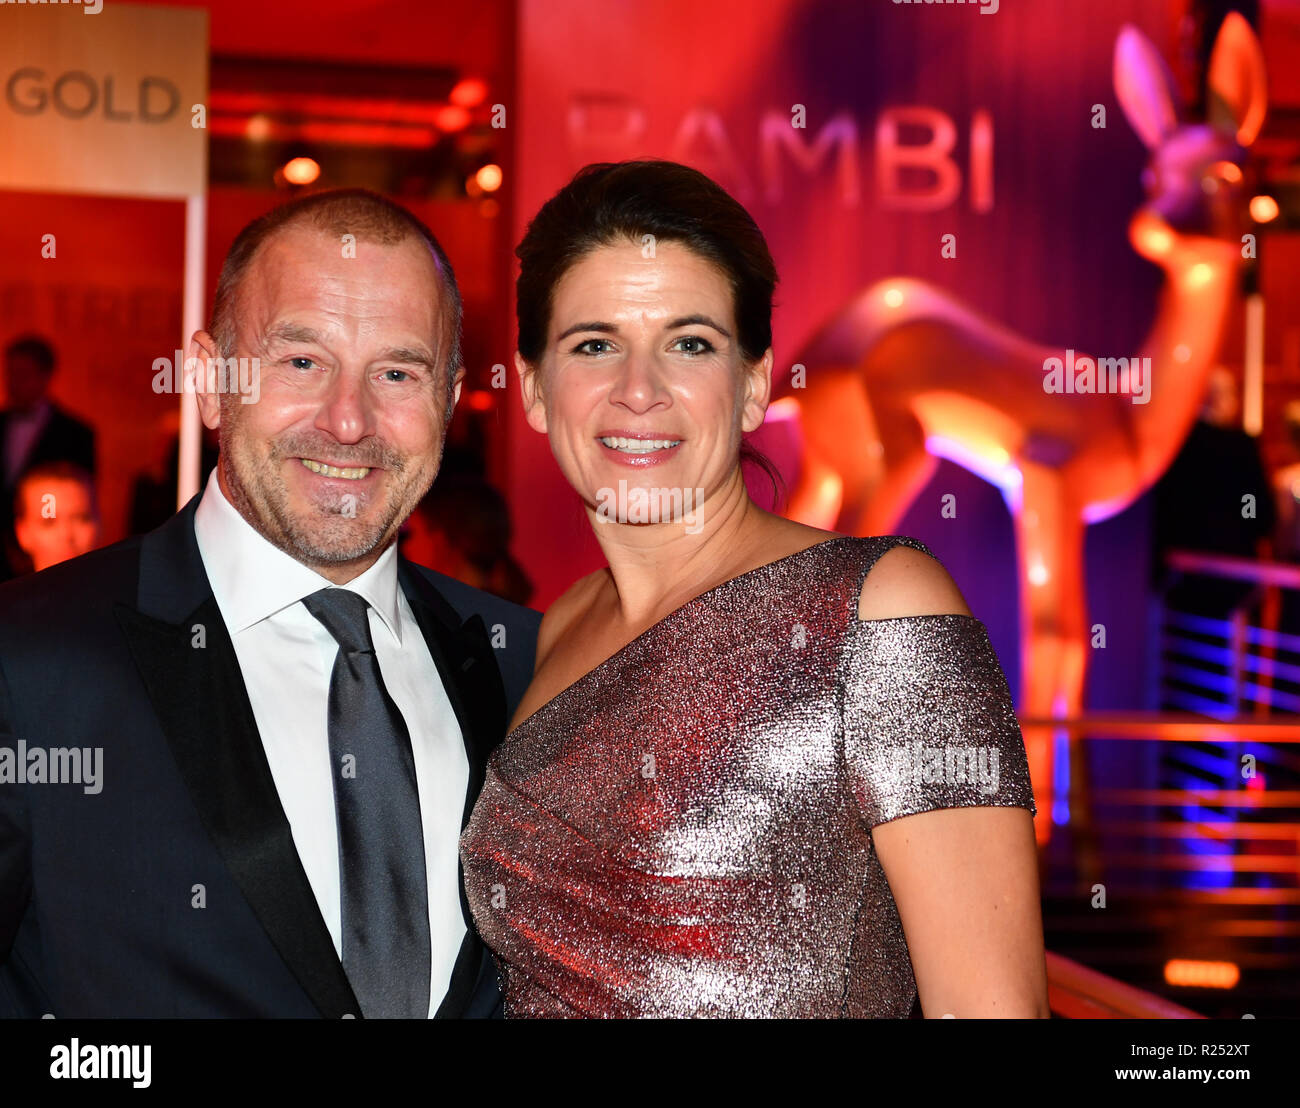 Berlin, Germany. 16th Nov, 2018. Heino Ferch and his wife Marie-Jeanette Ferch at the pre-reception of the 70th Bambi Media Prize in the Stage Theater. Credit: Soeren Stache/dpa/Alamy Live News Stock Photo